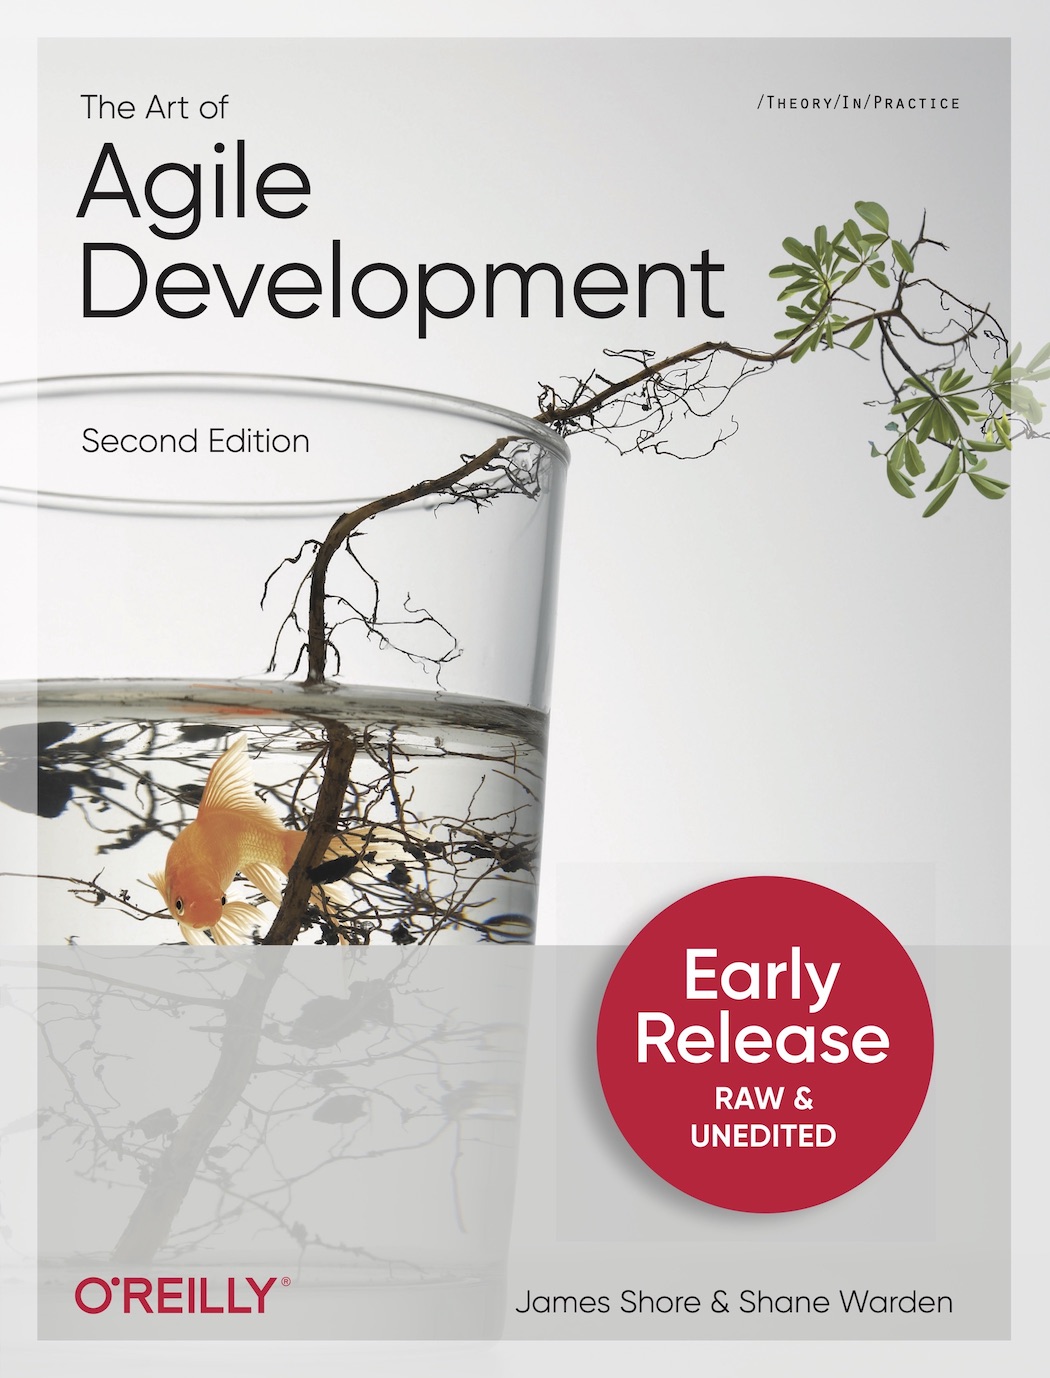 Book cover for “The Art of Agile Development, Second Edition” by James Shore and Shane Warden. Published by O'Reilly. The cover has a large sticker on it that says “Early Release: Raw and Unedited.” The cover artwork shows a water glass containing a small sapling. The sapling has small green leaves. There is a goldfish in the glass.